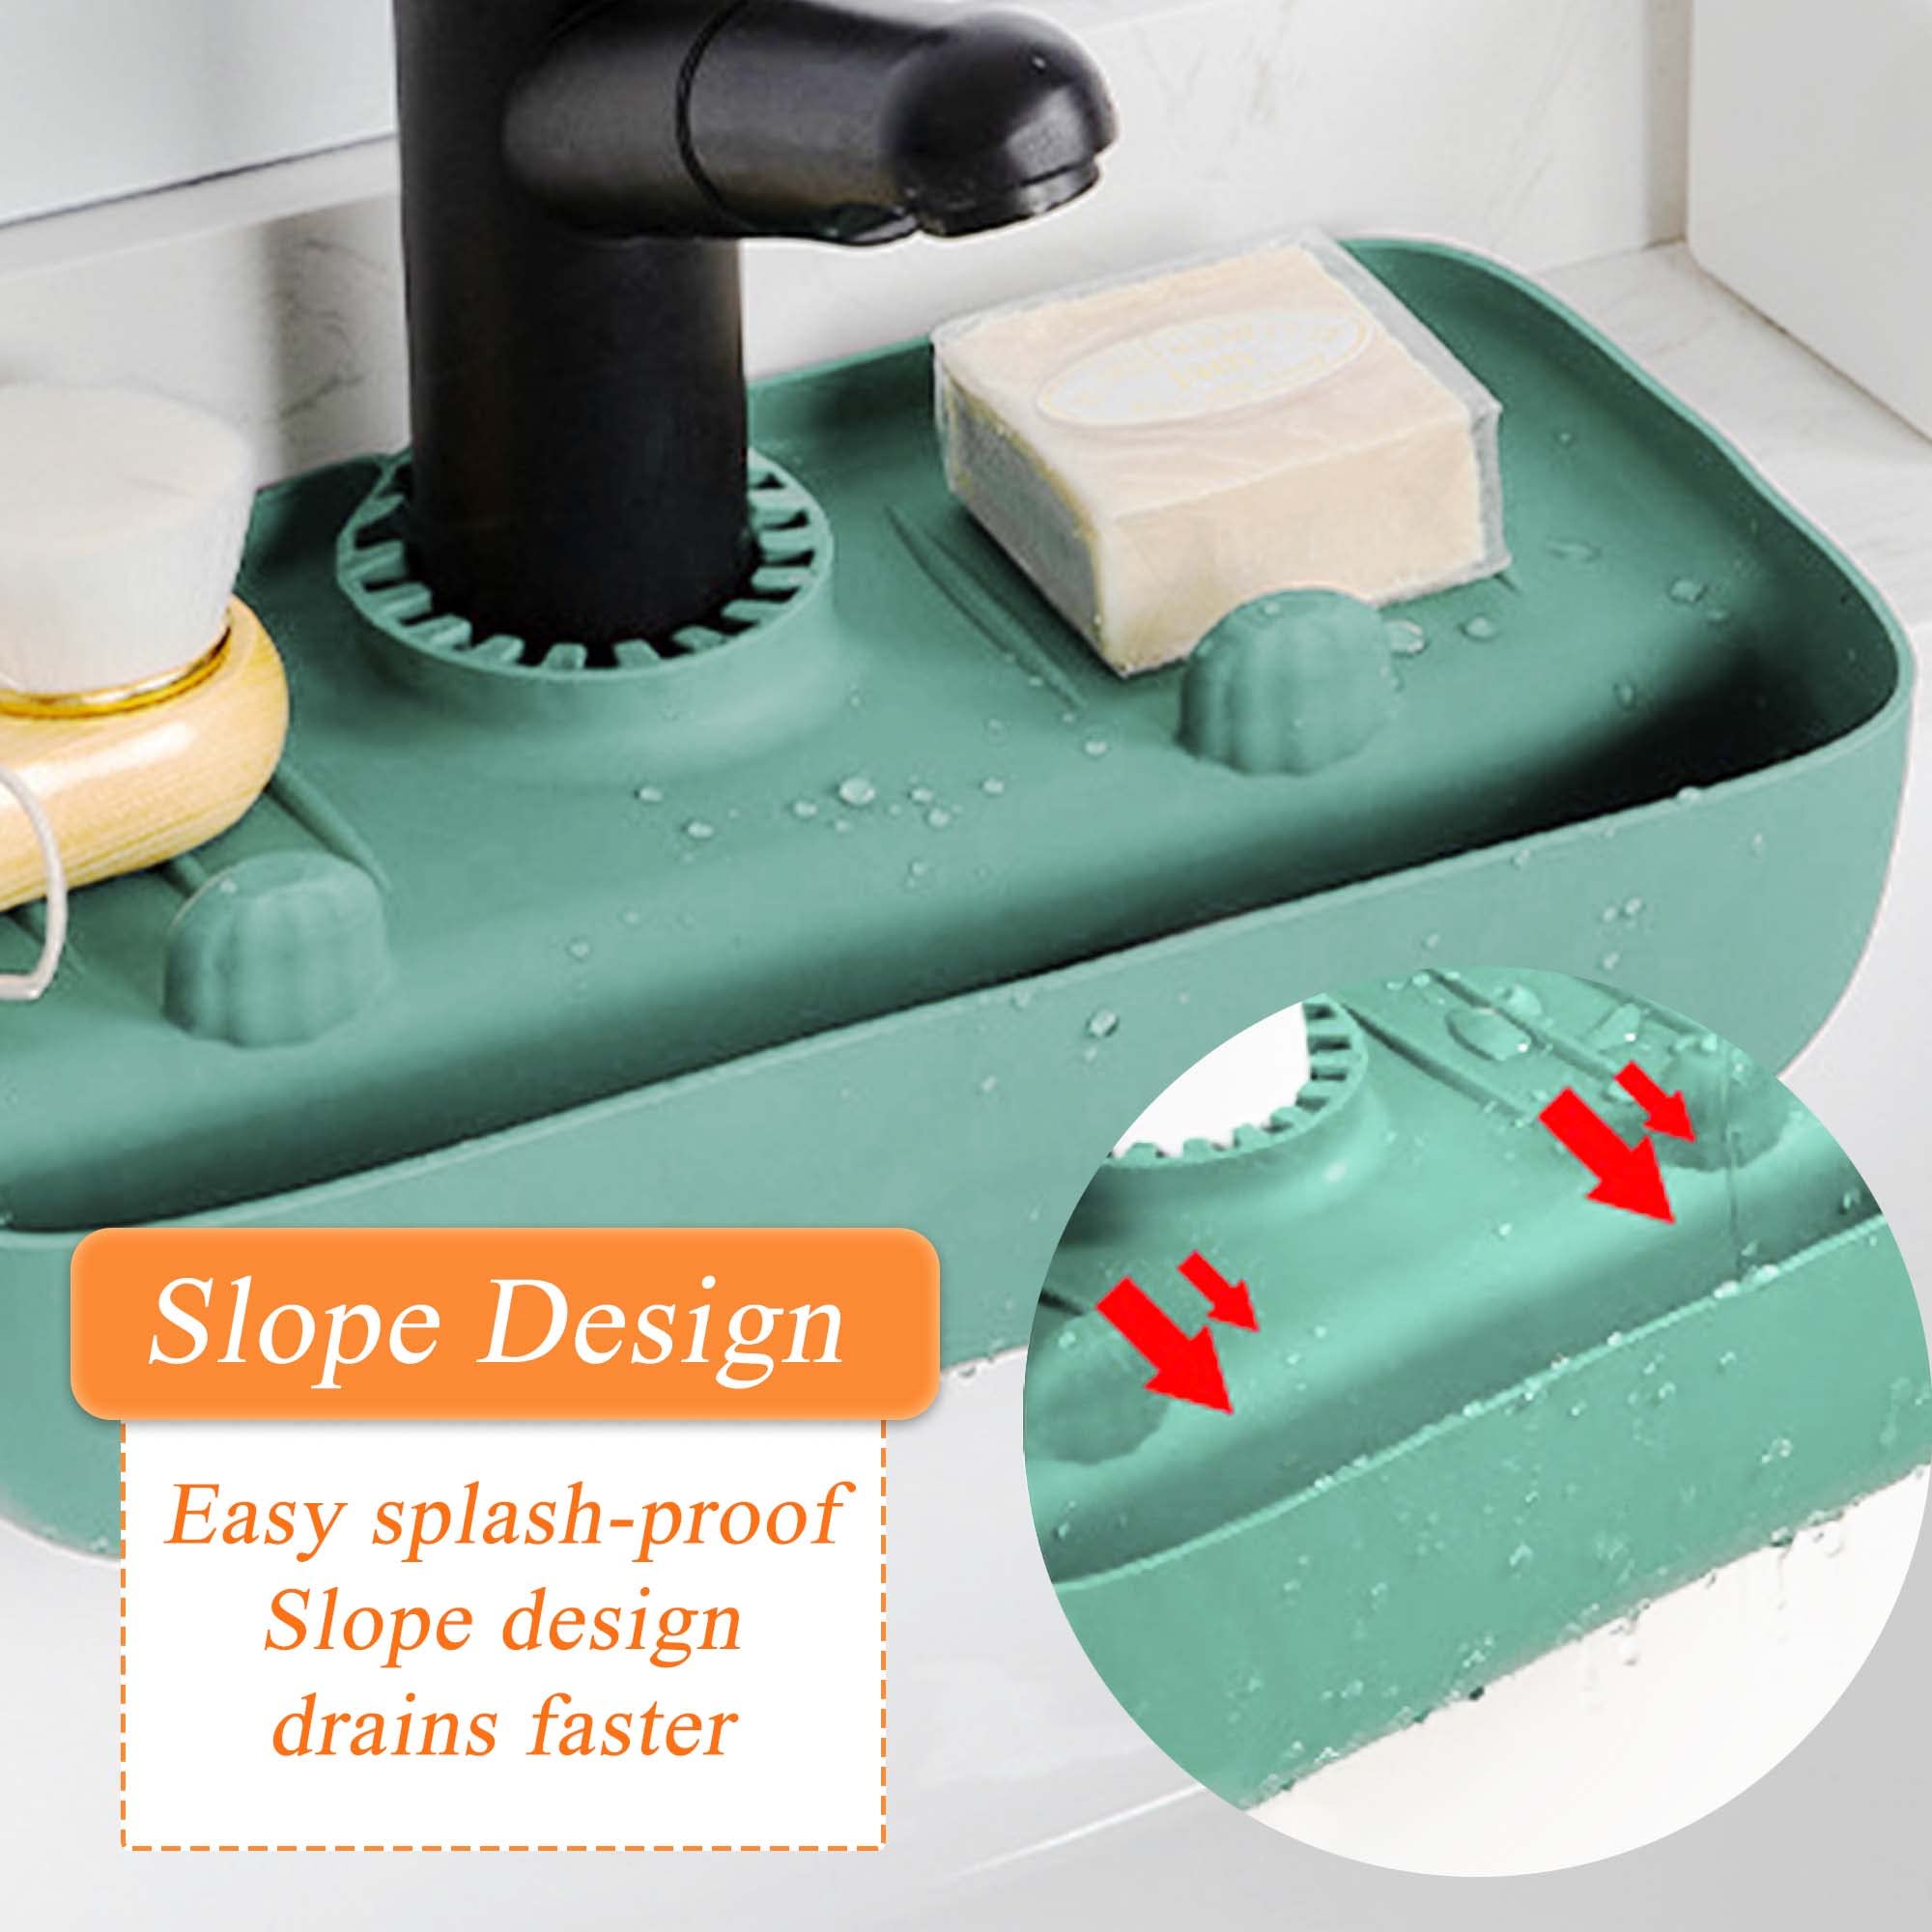 SooGree Faucet Hanging Sink Rack,Soap Sponge Holder Drain Shelving for Bathroom, Silicone Kitchen Storage Rack,Multifunctional Drainage Hole Durable Slope Design Storage Toiletry (Green)